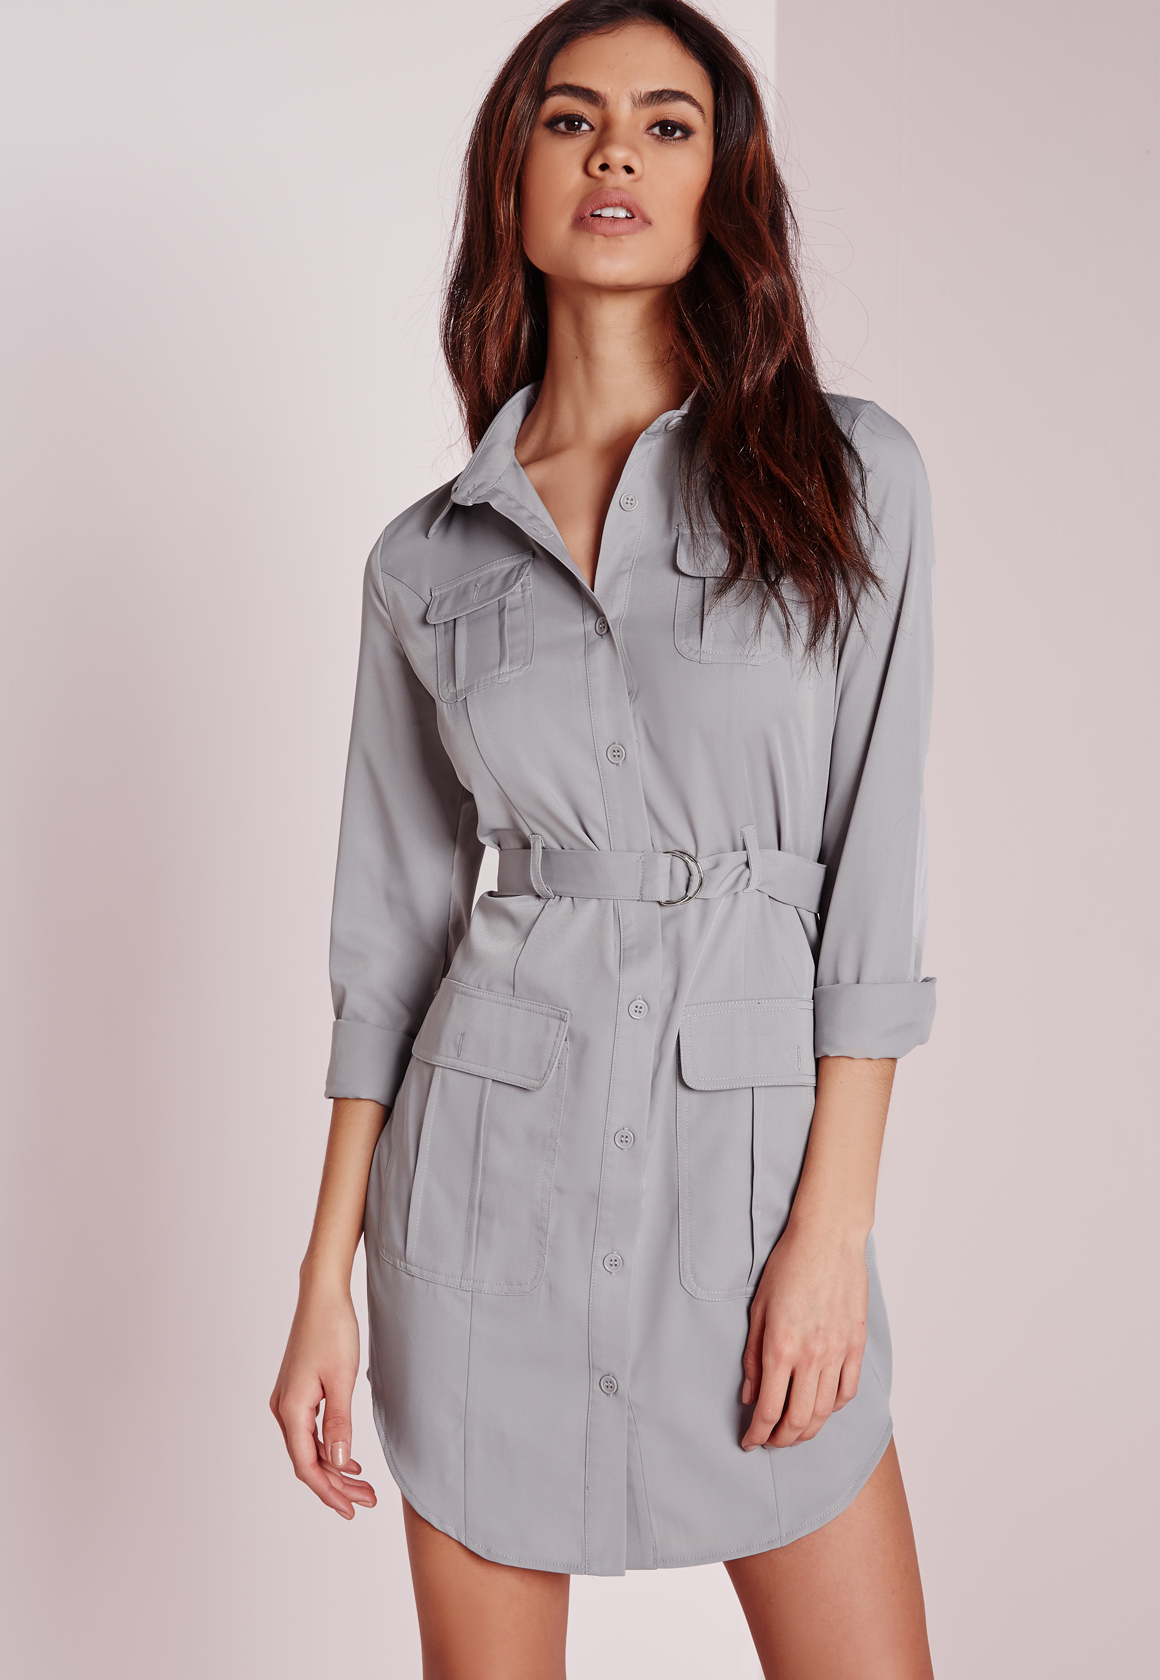 Lyst Missguided Petite  Exclusive Belted Shirt  Dress  Grey 